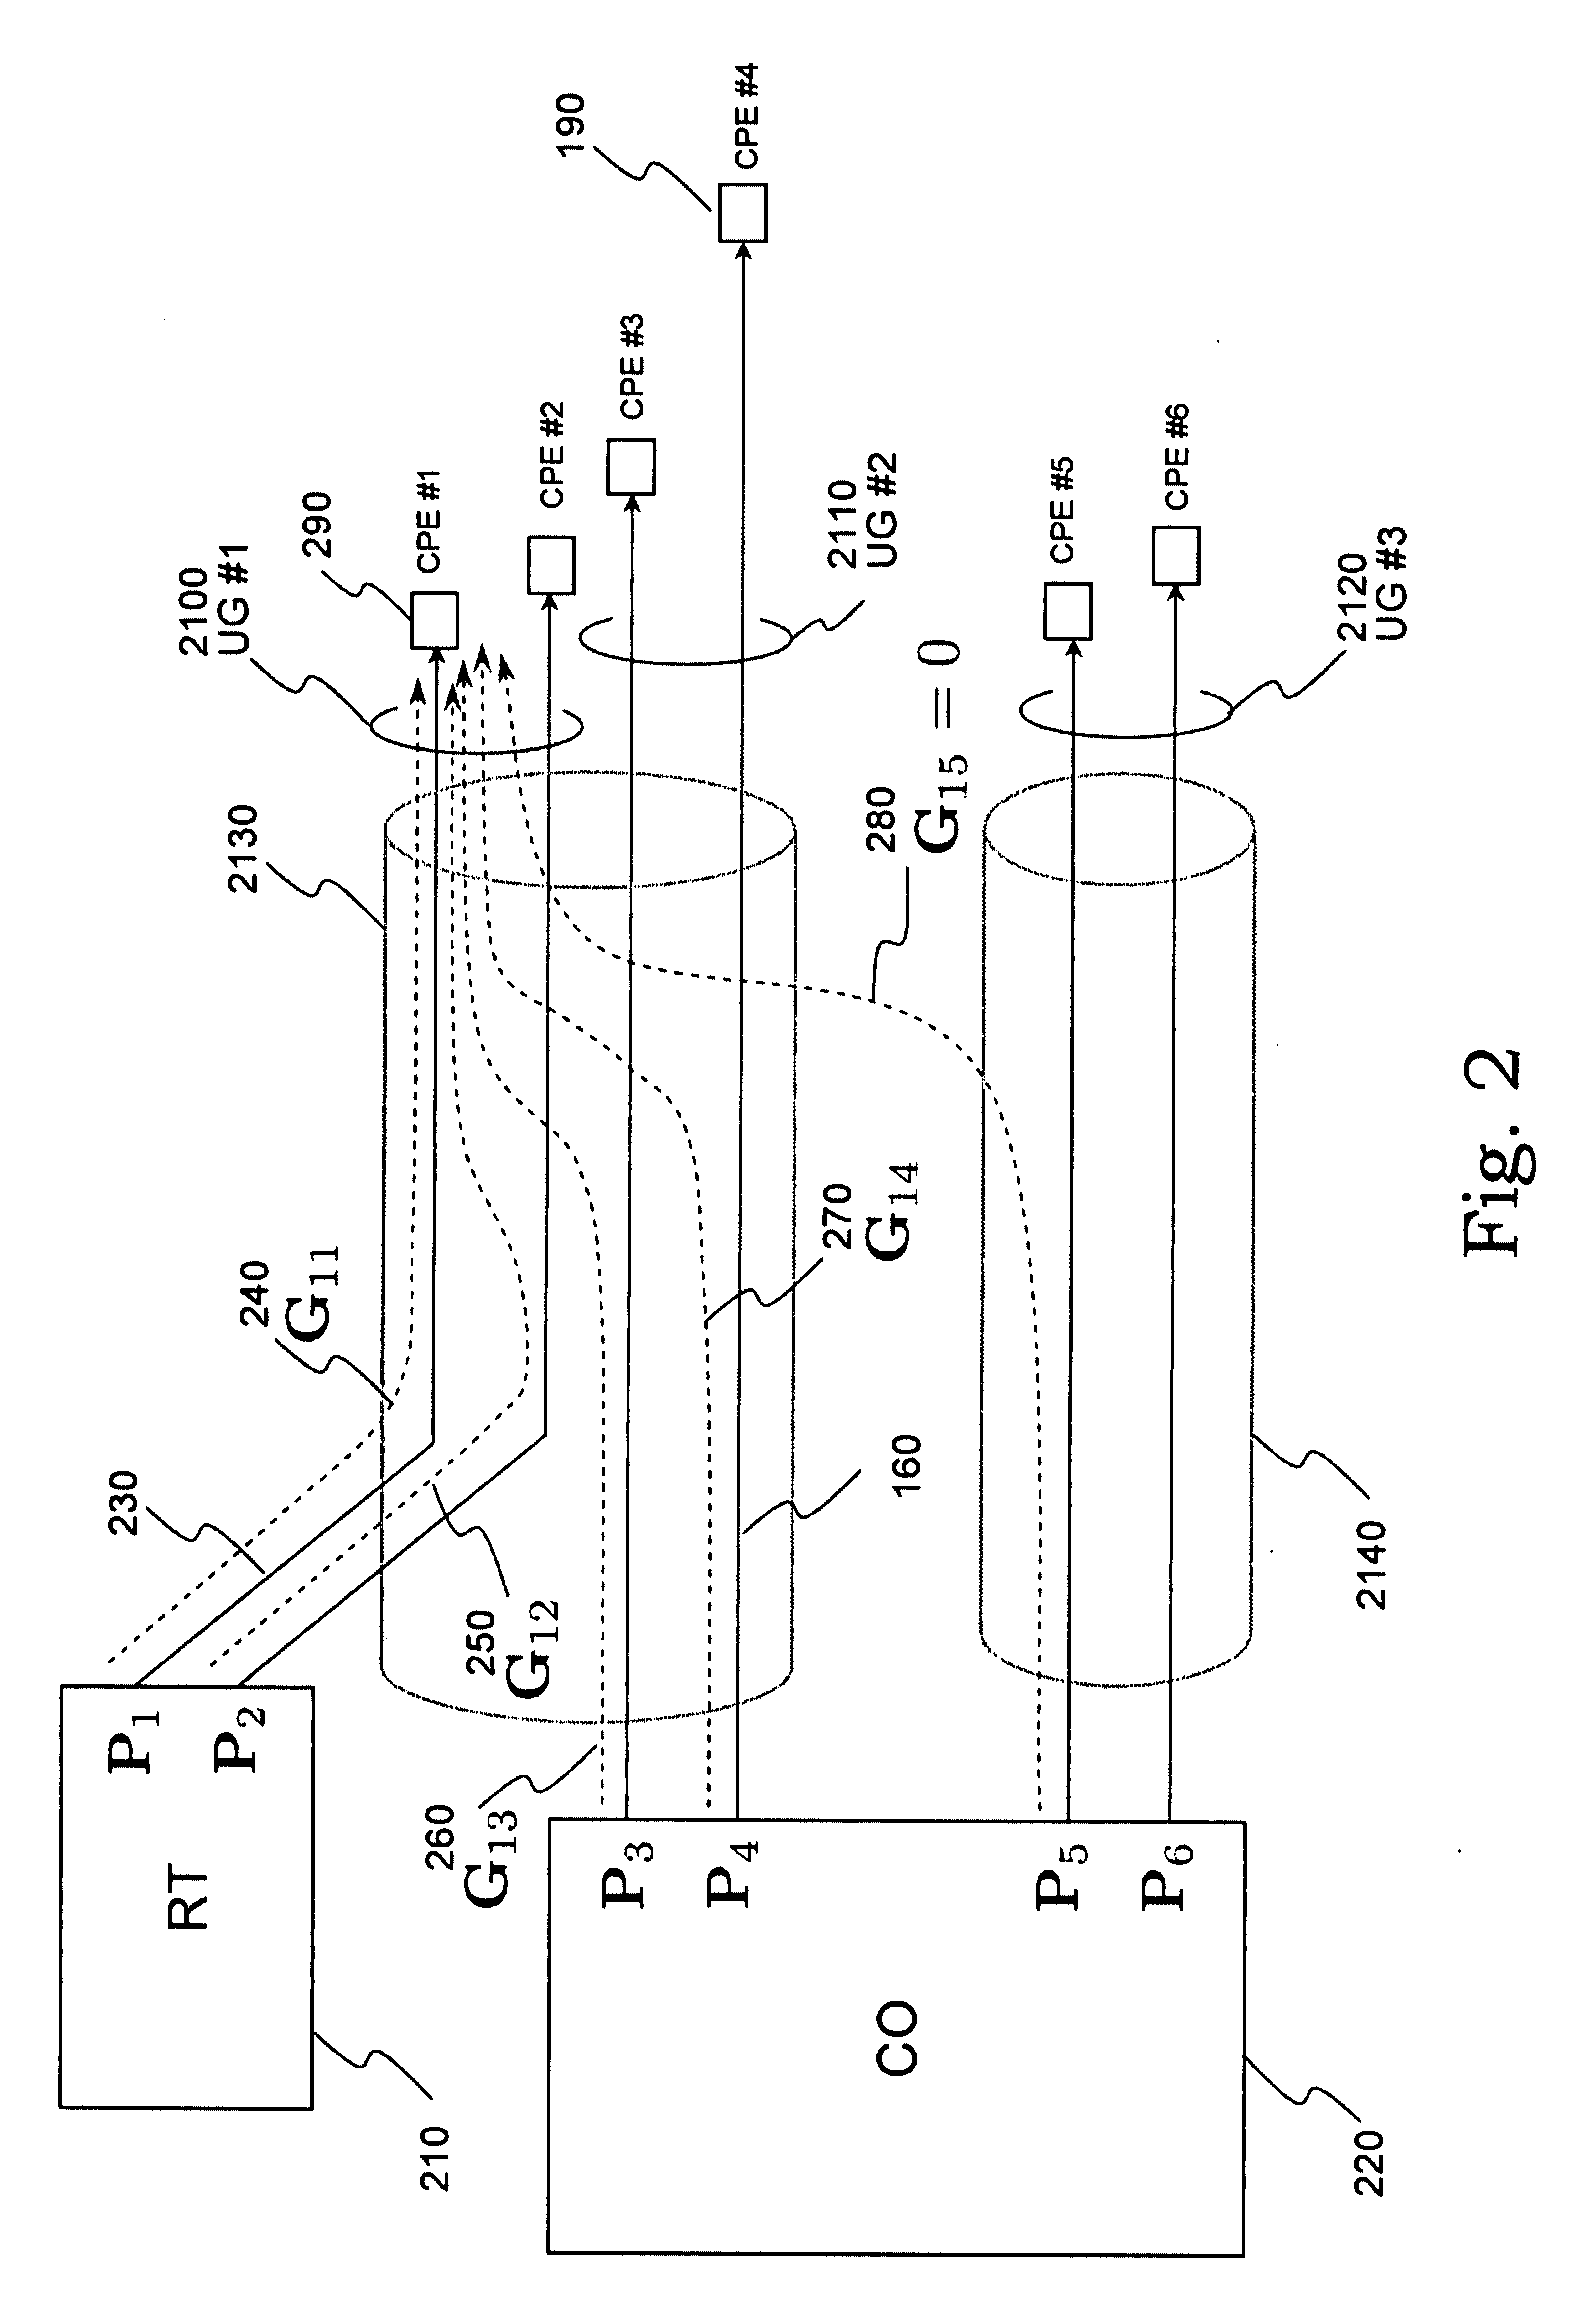 Adapted method for spectrum management of digital communication systems